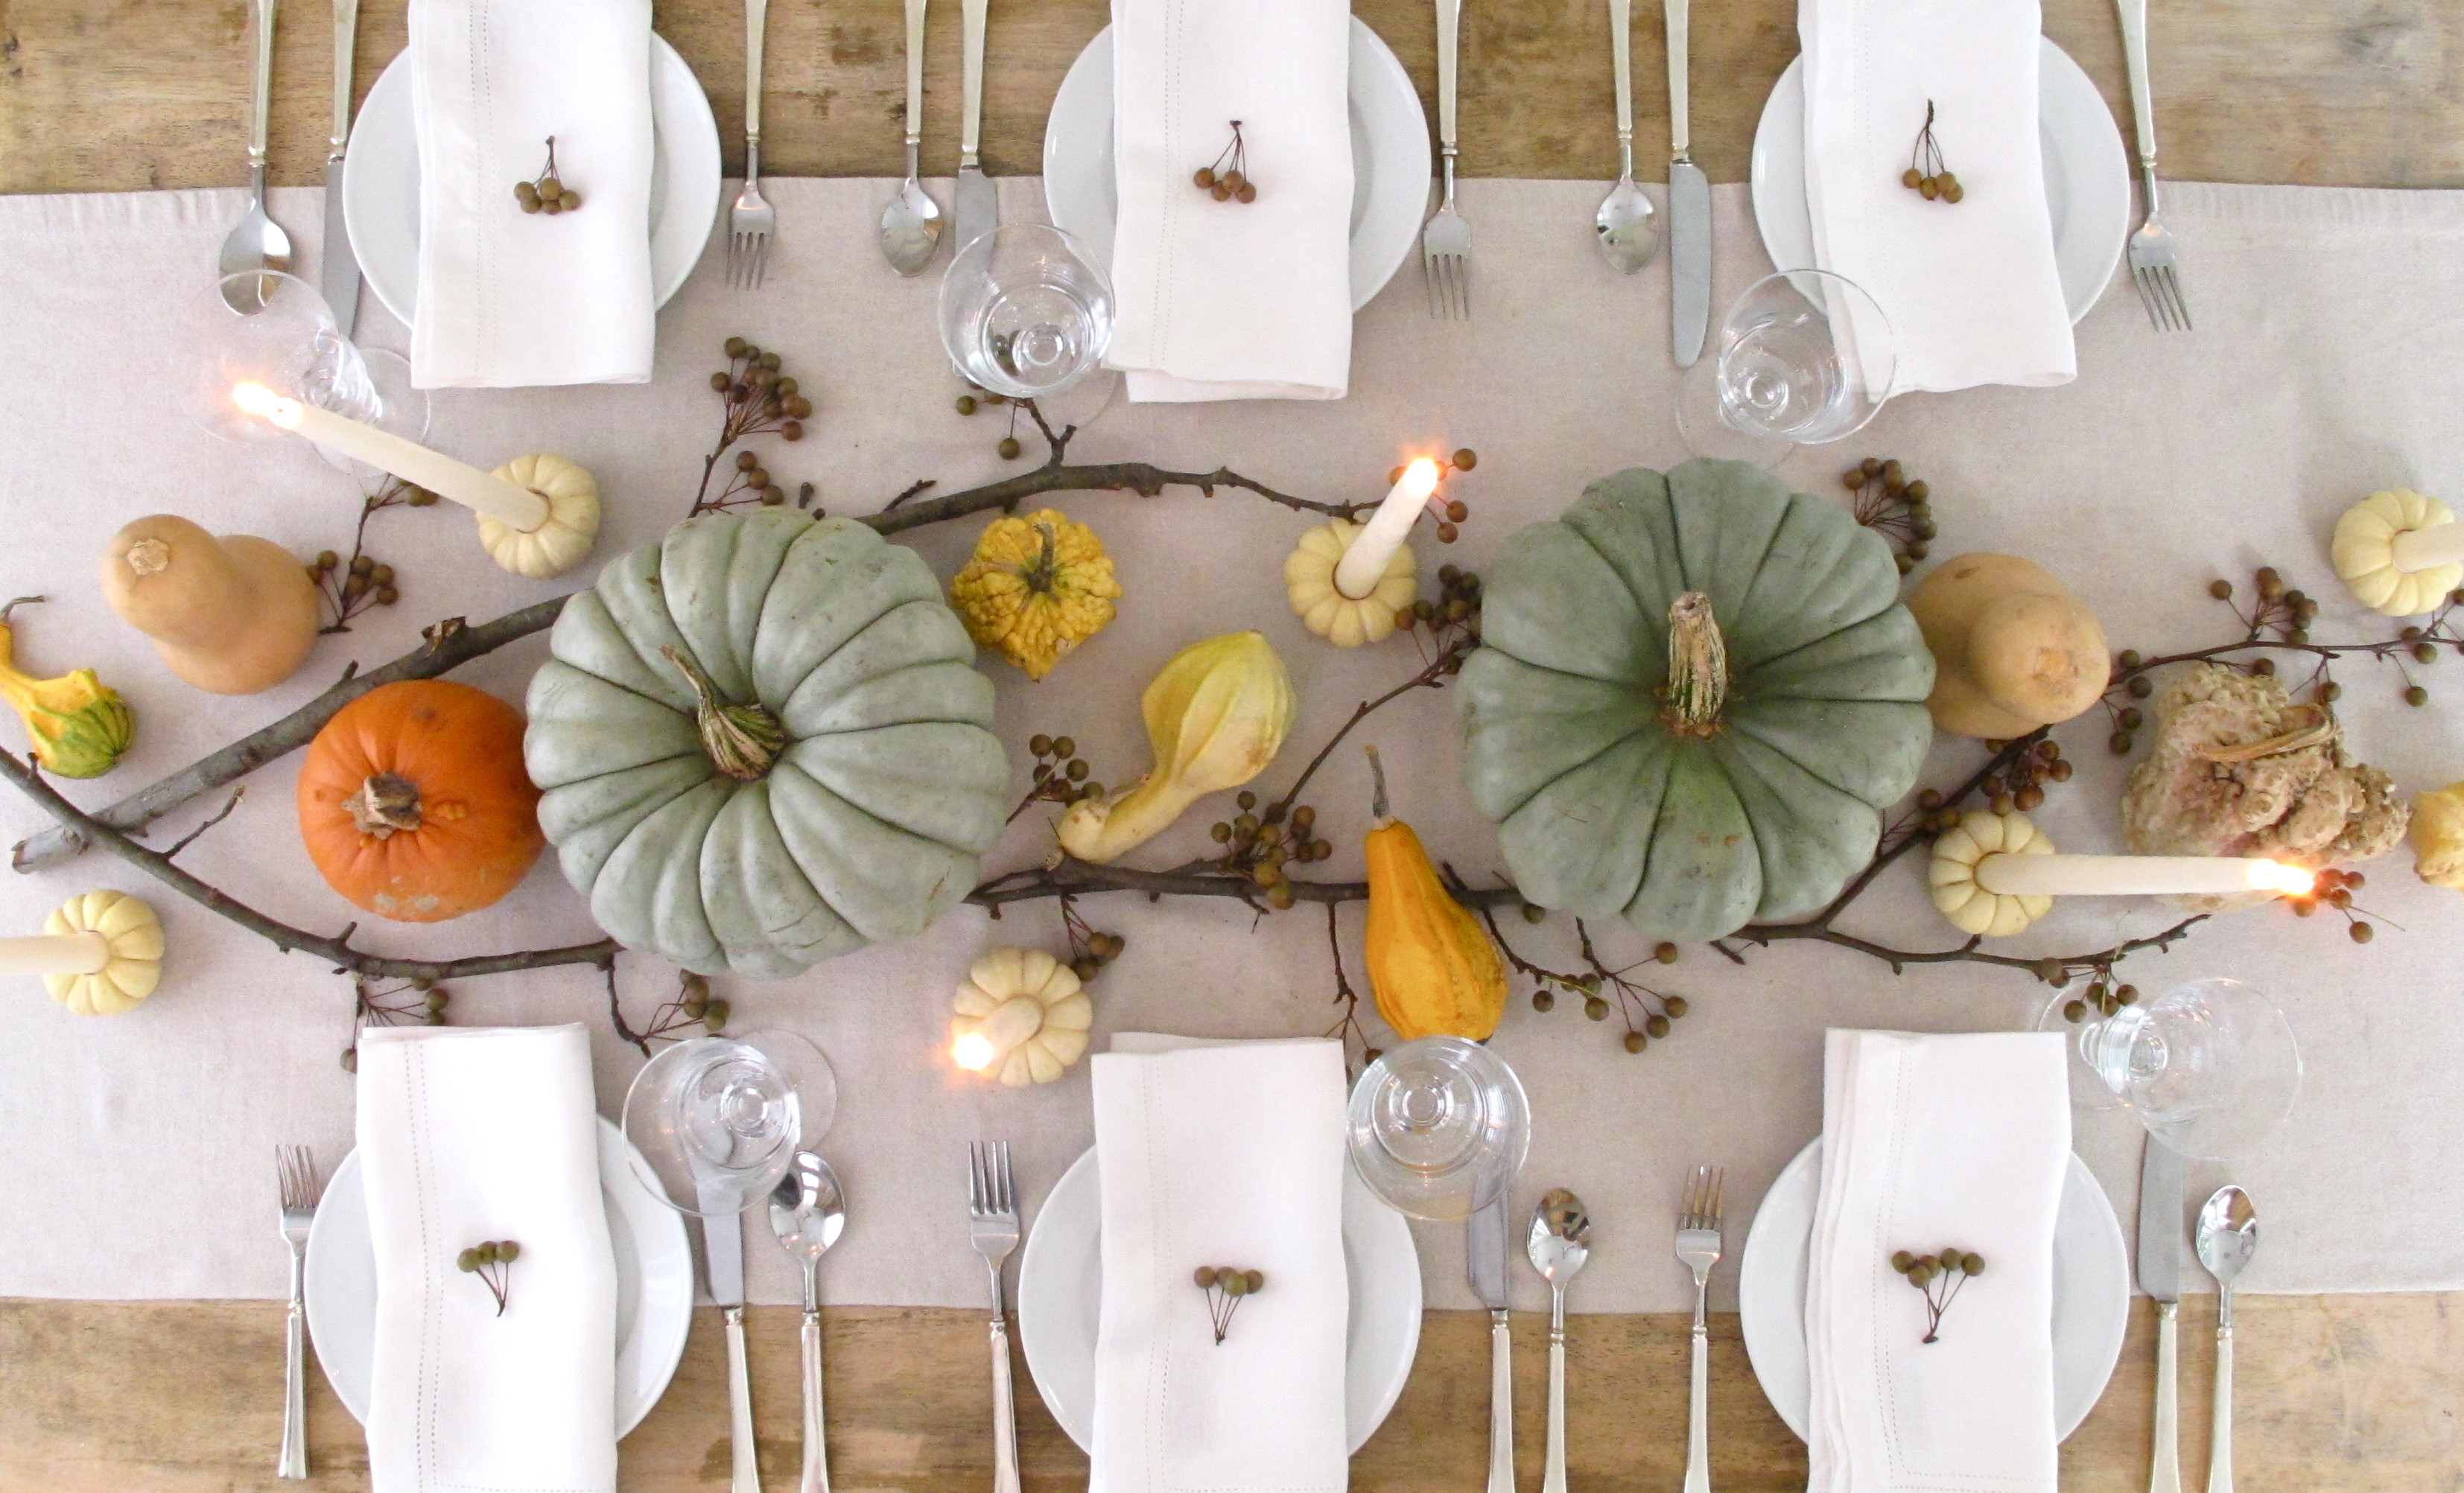 Thanksgiving Table Decorations
 Our favorite Thanksgiving Day table settings TODAY